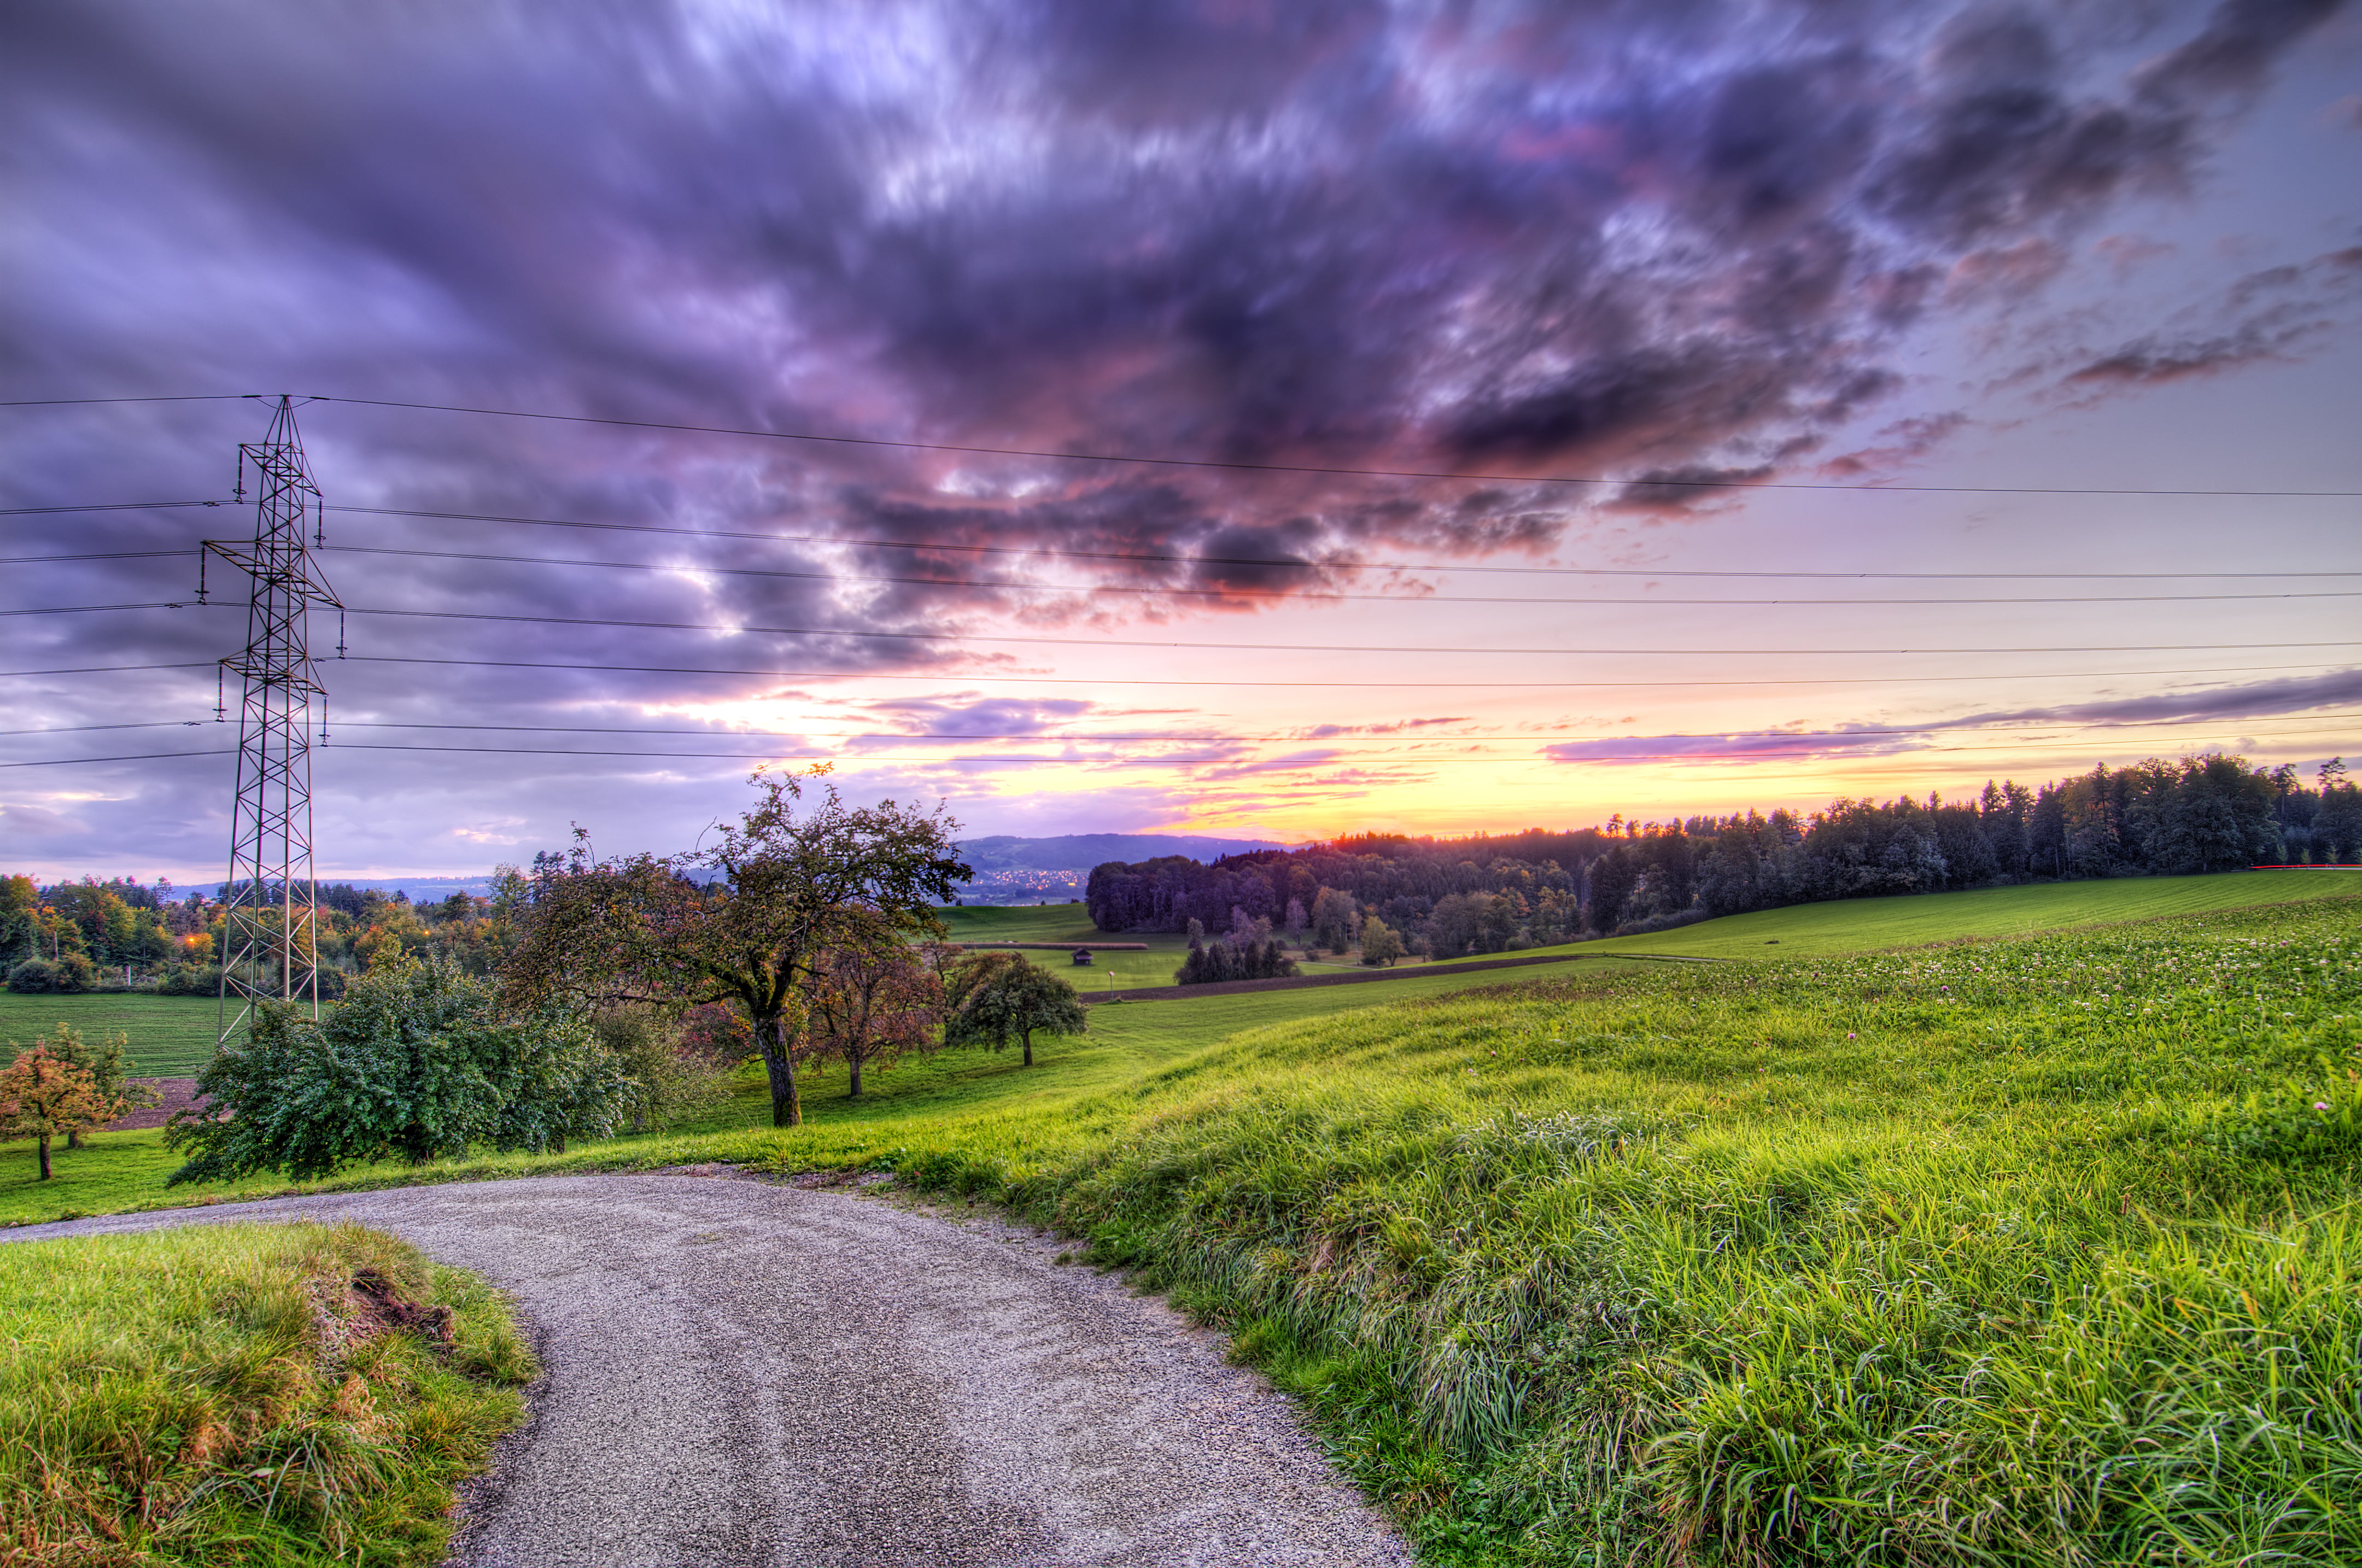 Empty road in between grass field under gray clouds during sunset HD ...